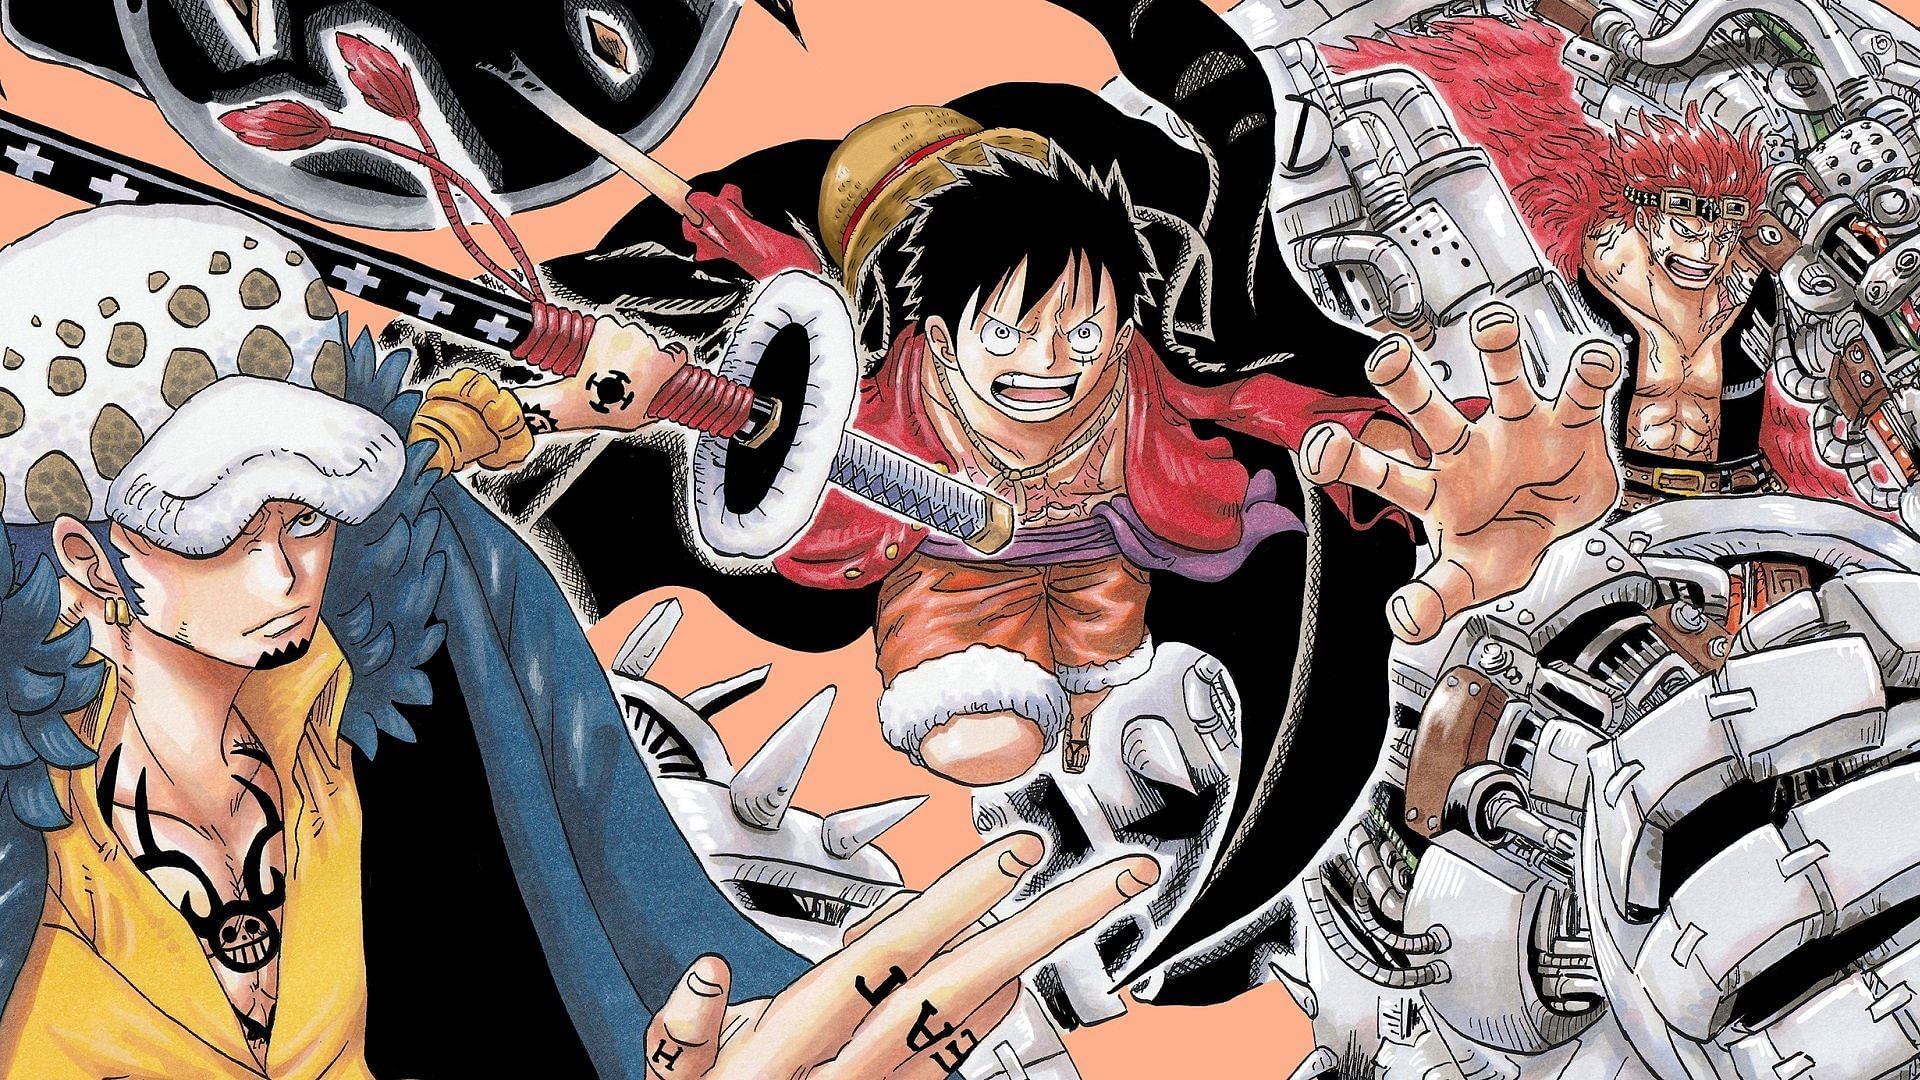 After showing that Luffy is much stronger than them, depicting Kid and Law as proper rivals for him seems rather forced (Image via Eiichiro Oda/Shueisha, One Piece)